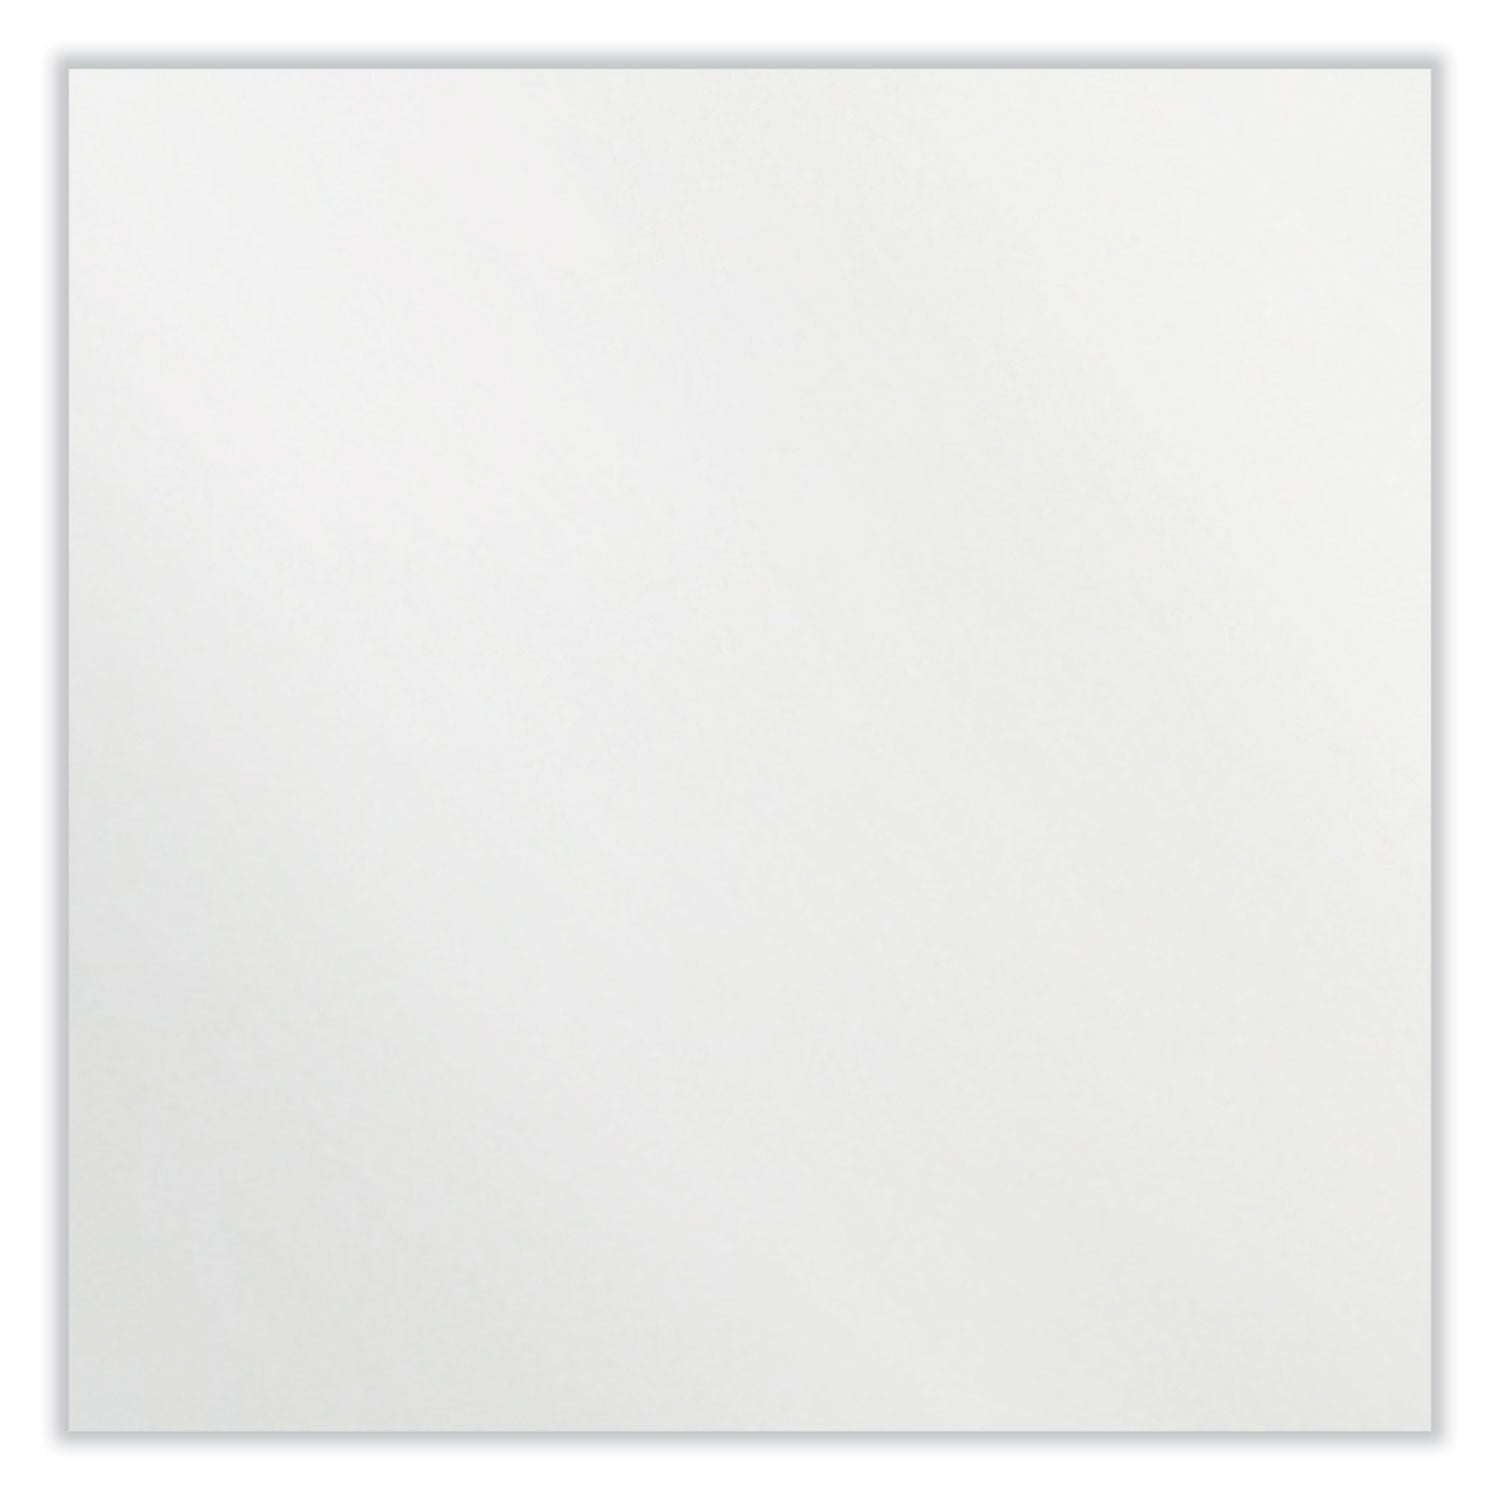 coda-low-profile-circular-magnetic-glassboard-36-diameter-white-surface-ships-in-7-10-business-days_ghecdagm36wh - 3